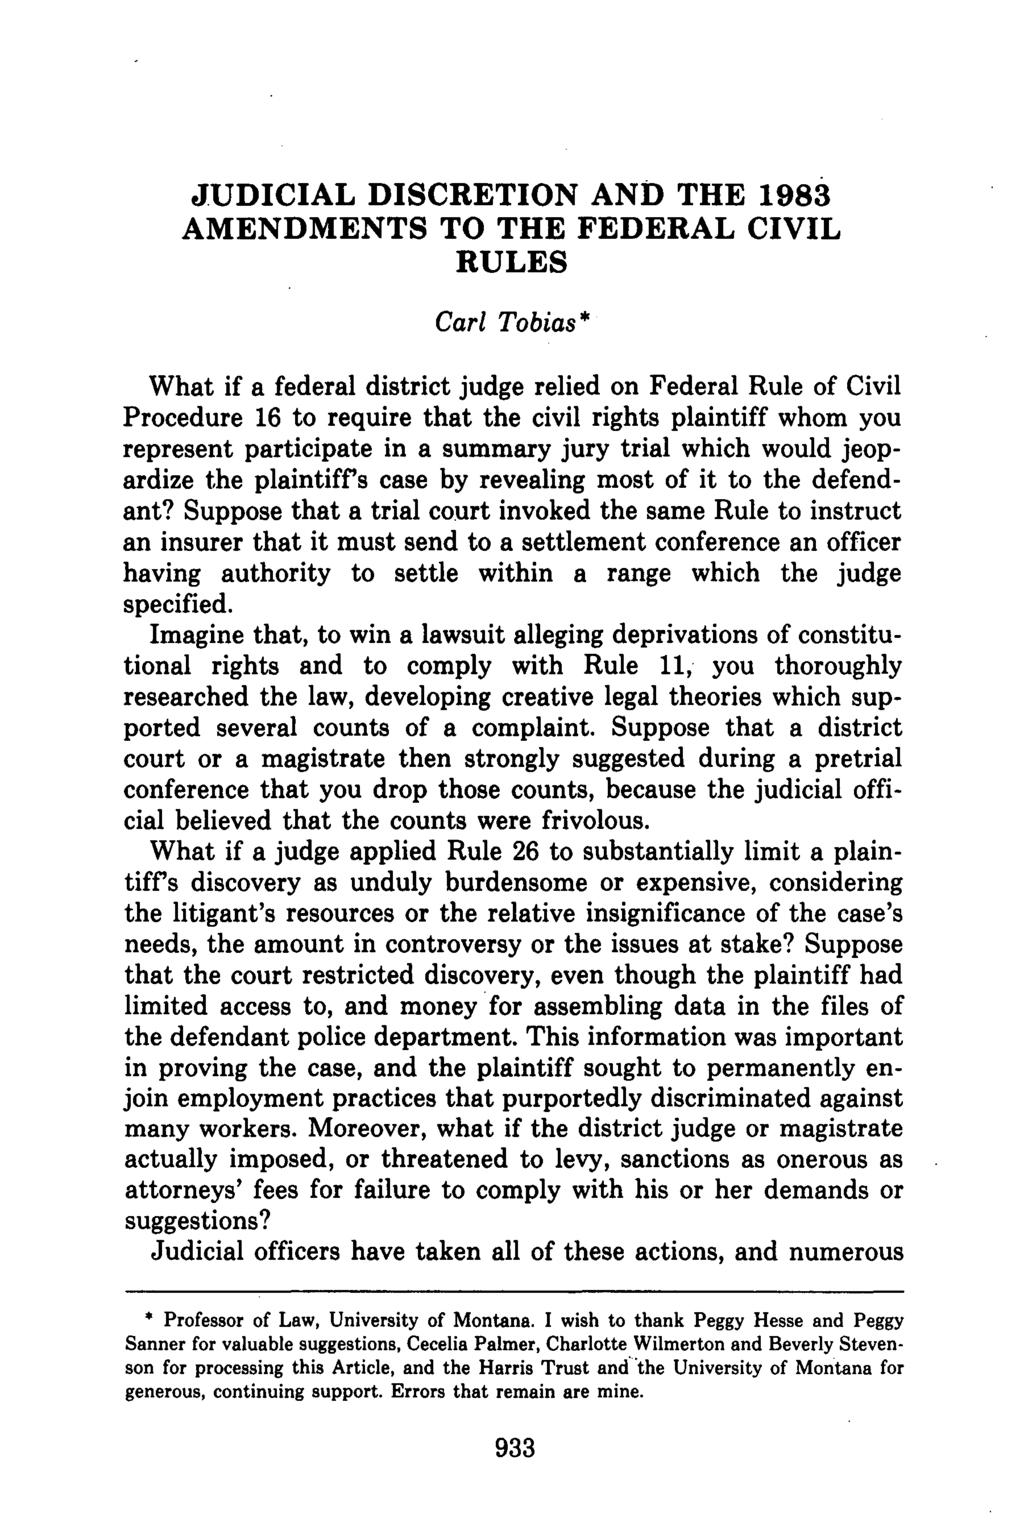 JUDICIAL DISCRETION AND THE 1983 AMENDMENTSTOTHEFEDERALCIVIL RULES Carl Tobias* What if a federal district judge relied on Federal Rule of Civil Procedure 16 to require that the civil rights